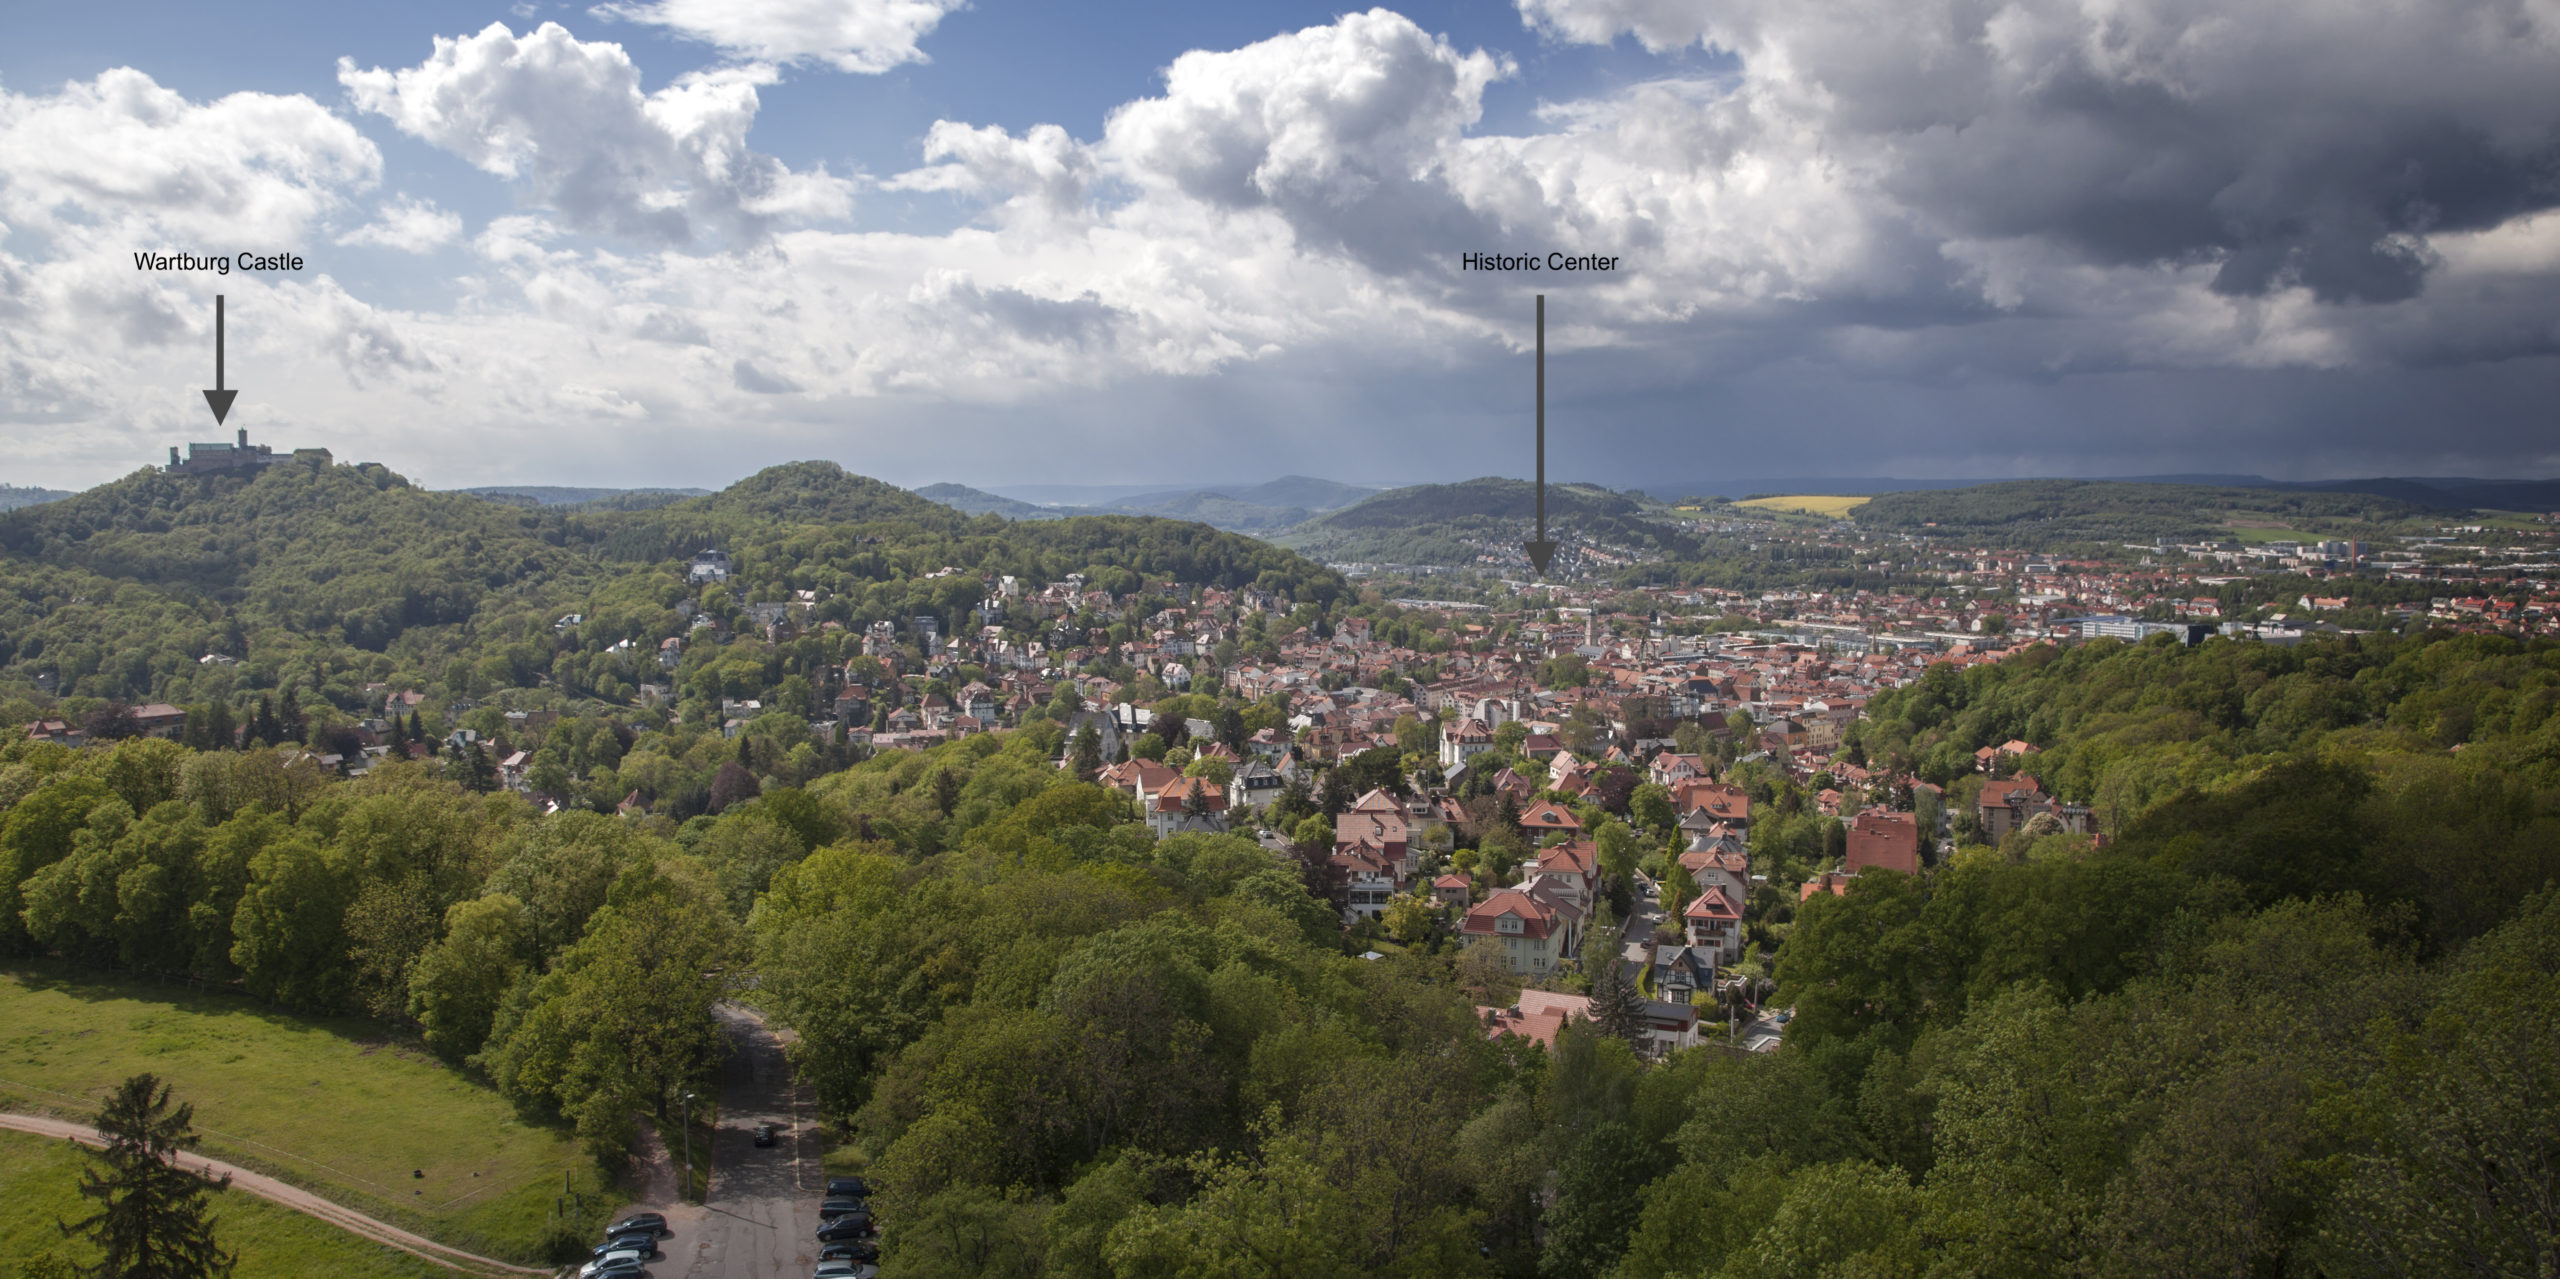 Eisenach, a city of music and inspiration